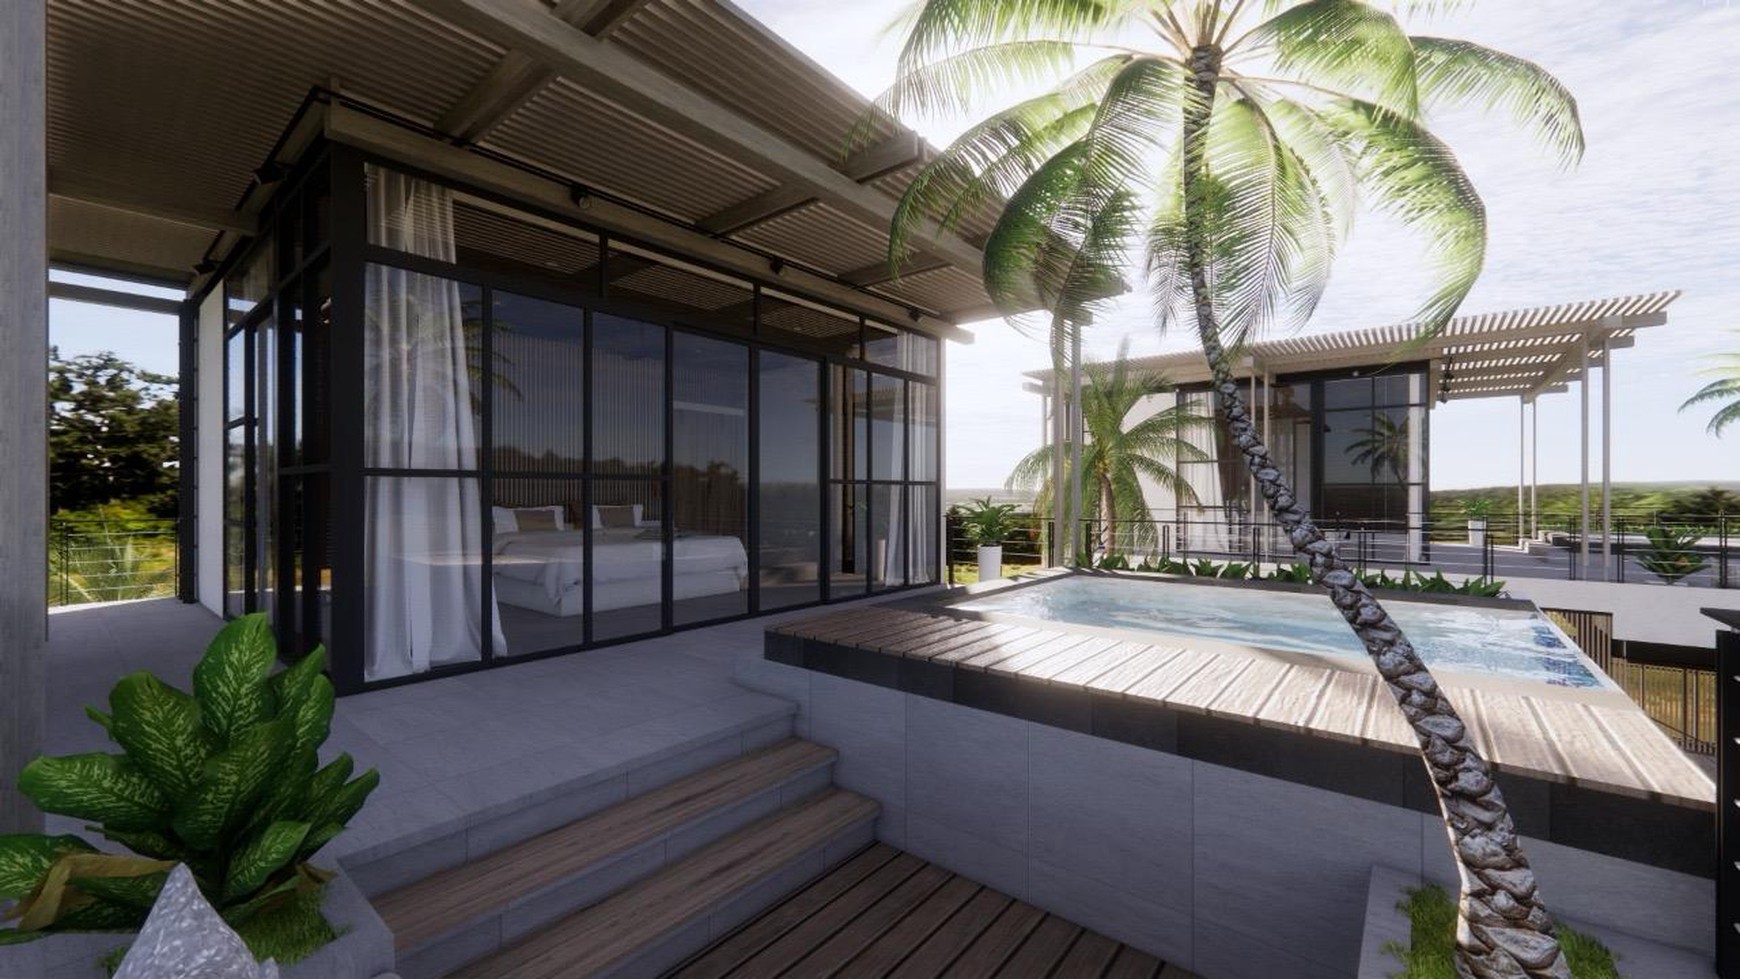 Leasehold - Exquisite Luxury Living A Paradise Retreat in Canggu